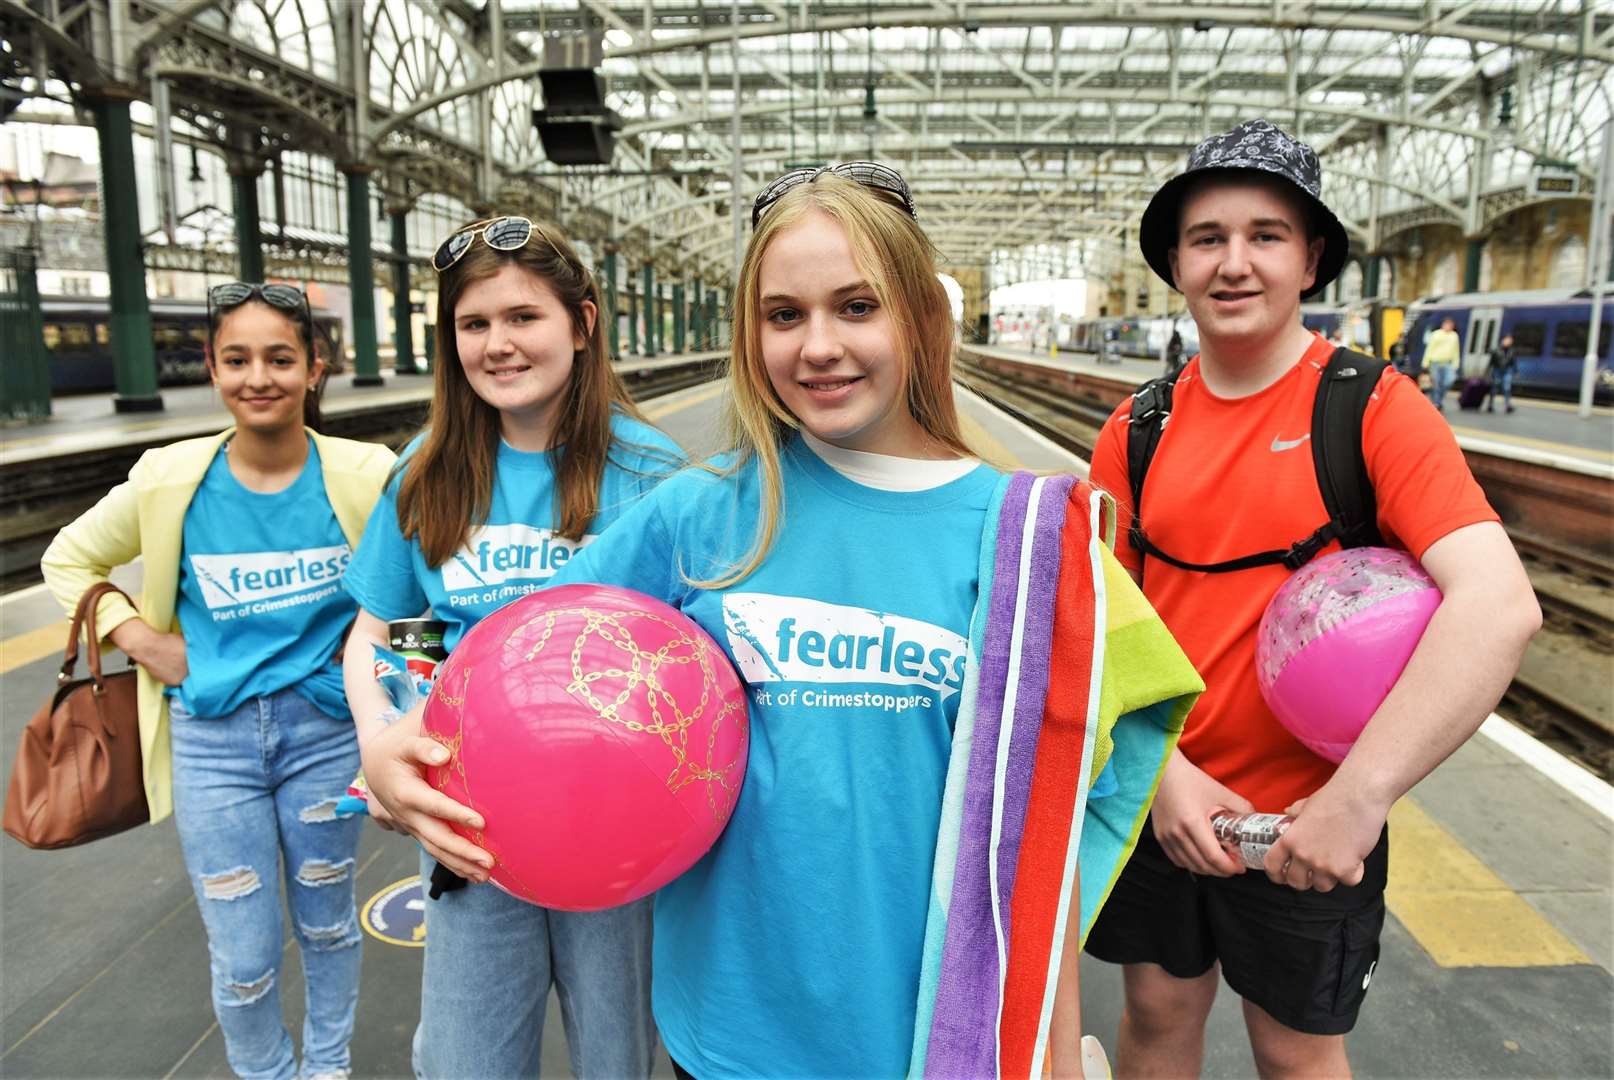 Fearless, the youth programme of independent charity Crimestoppers holds the launch of its summer campaign in Glasgow Central Station.